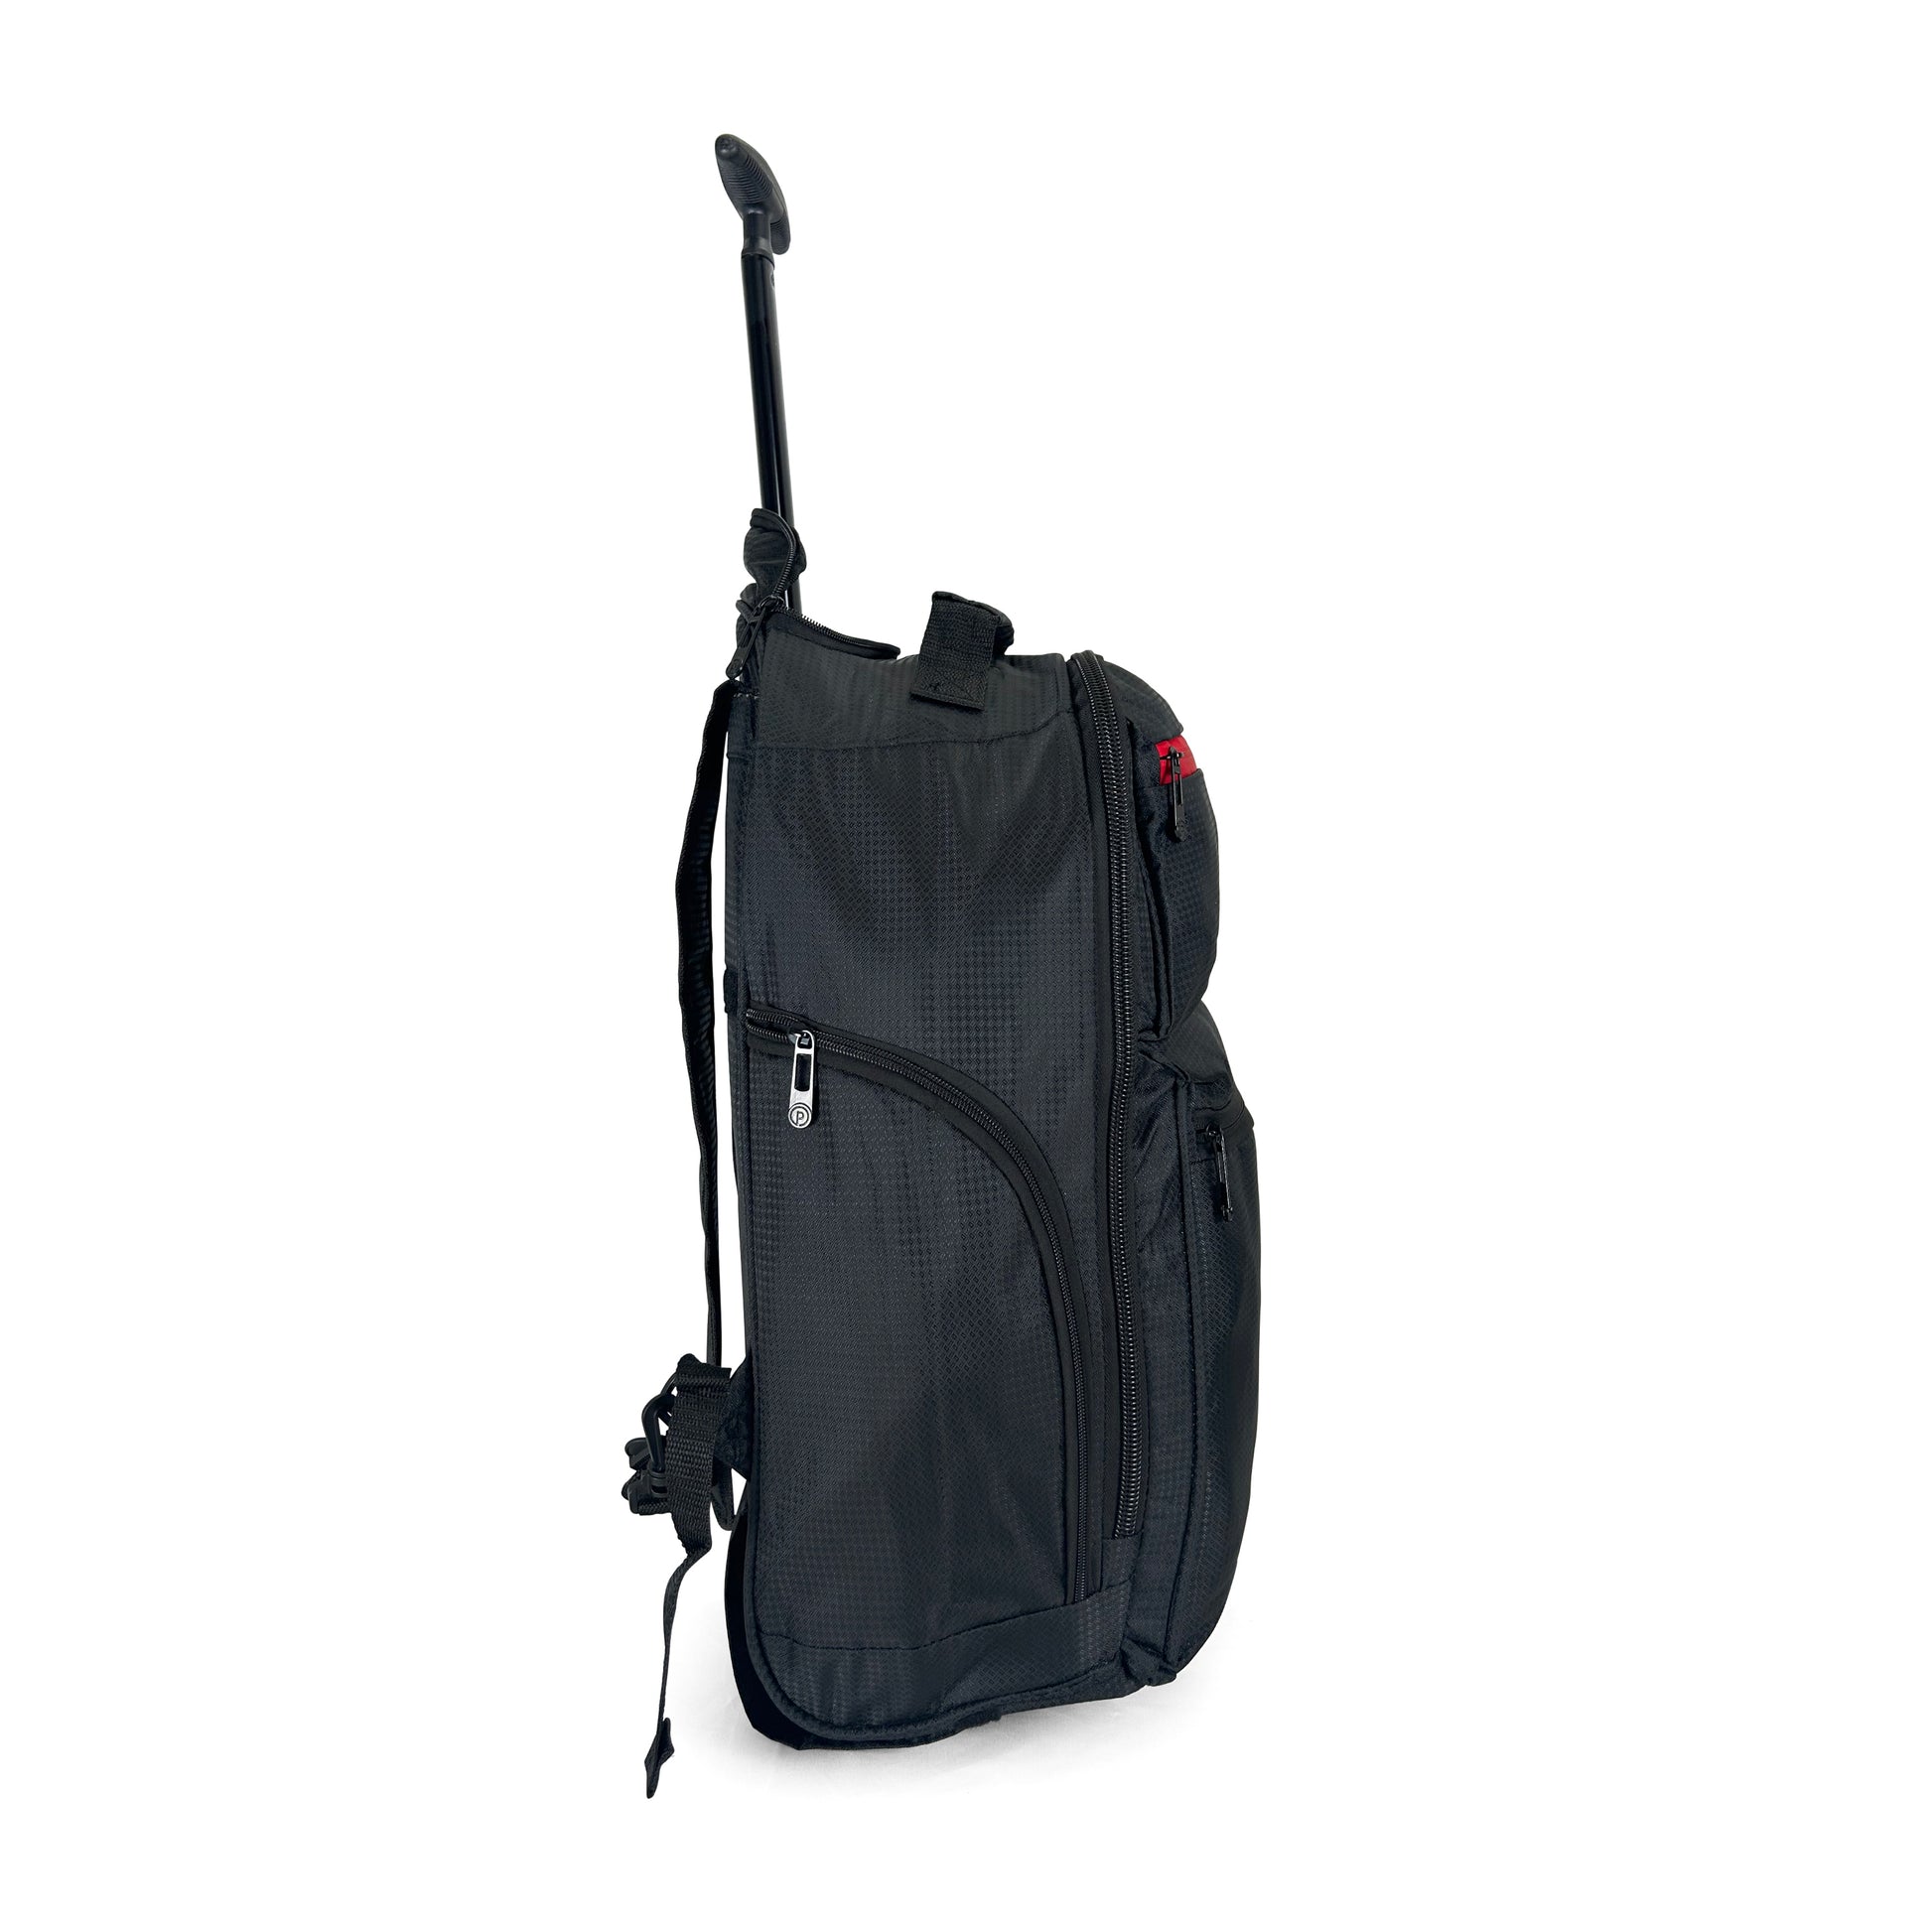 22 Inch Rolling Backpack, Best Backpack Luggage